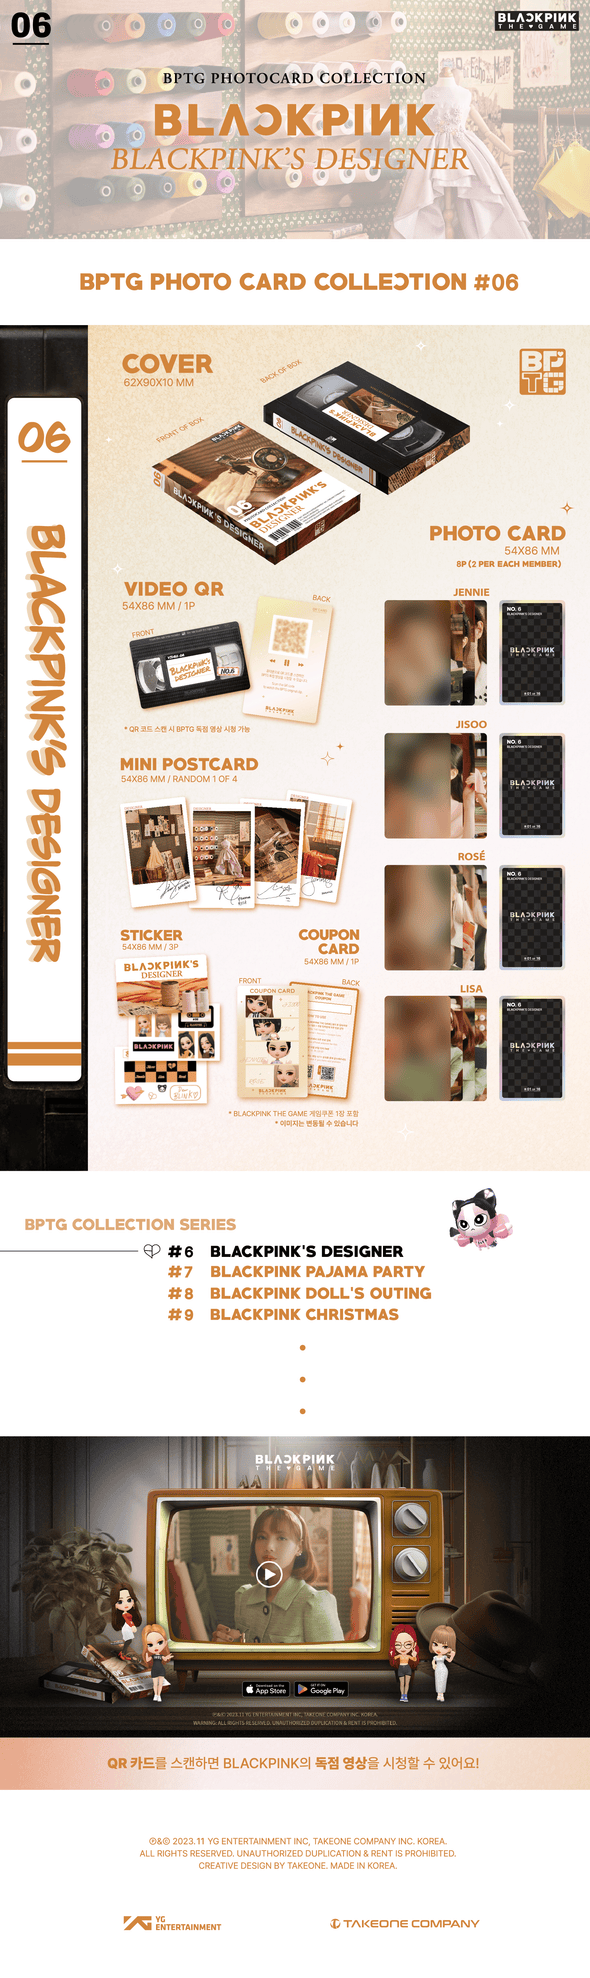 BLACKPINK - The Game Photocard collection No.4~6 - Kpop Music 사랑해요